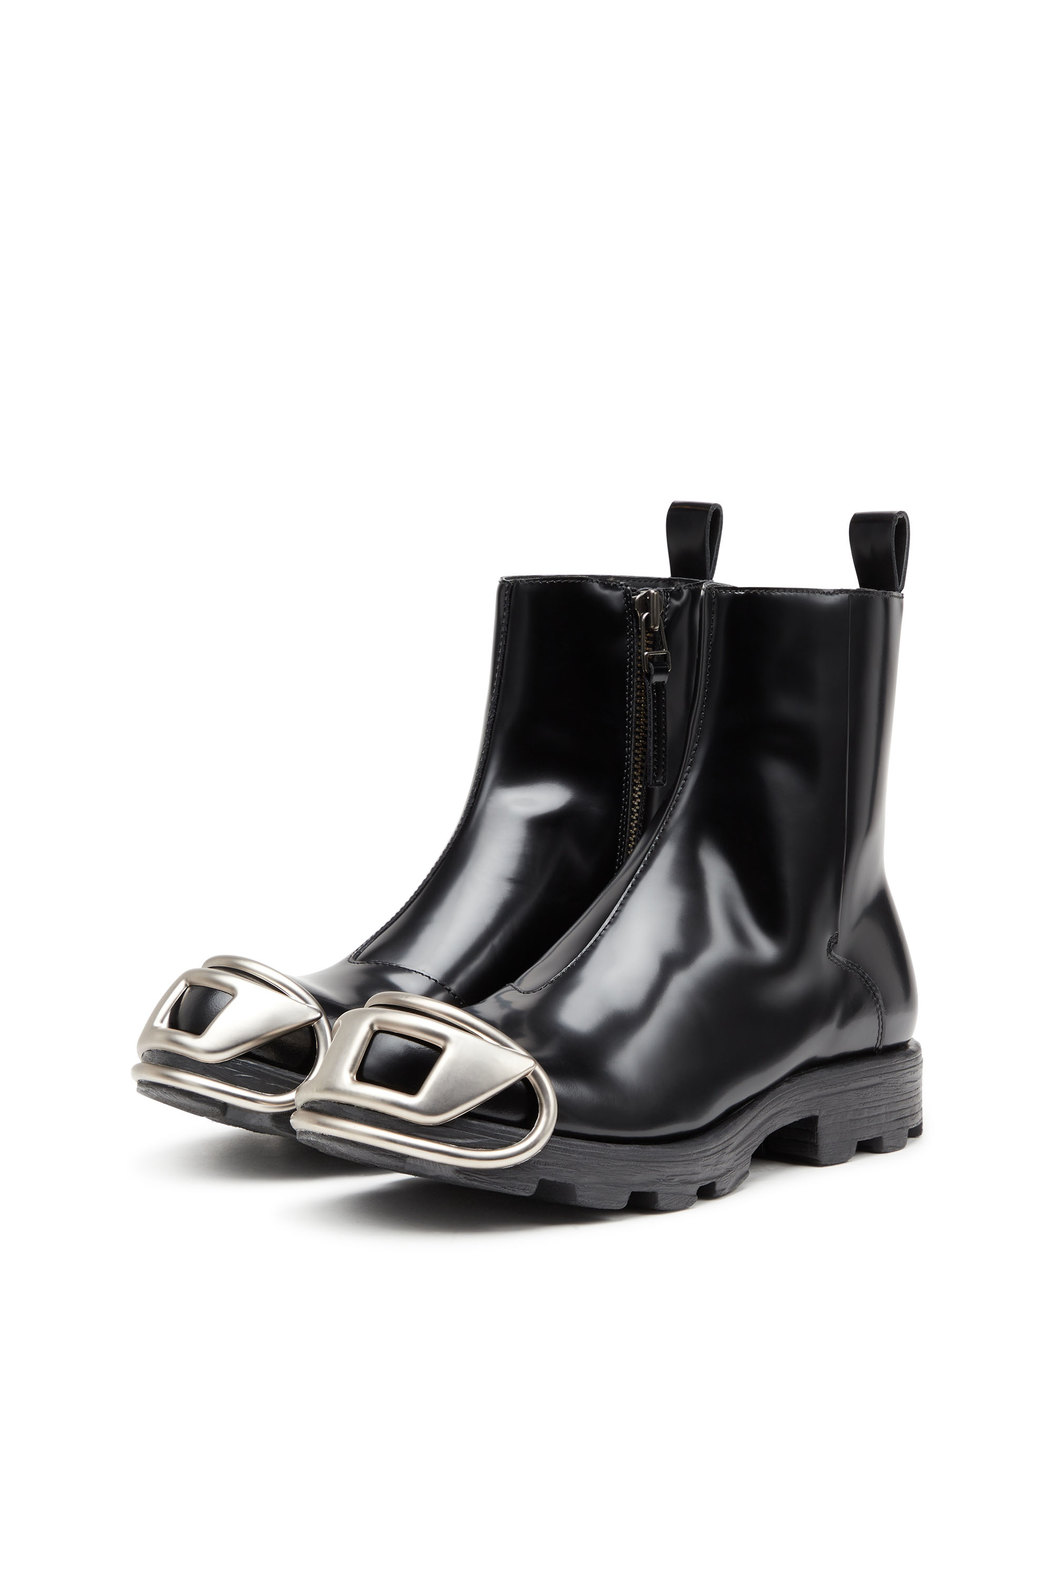 D-Hammer Bt Zip D - Leather Chelsea boots with Oval D toe caps